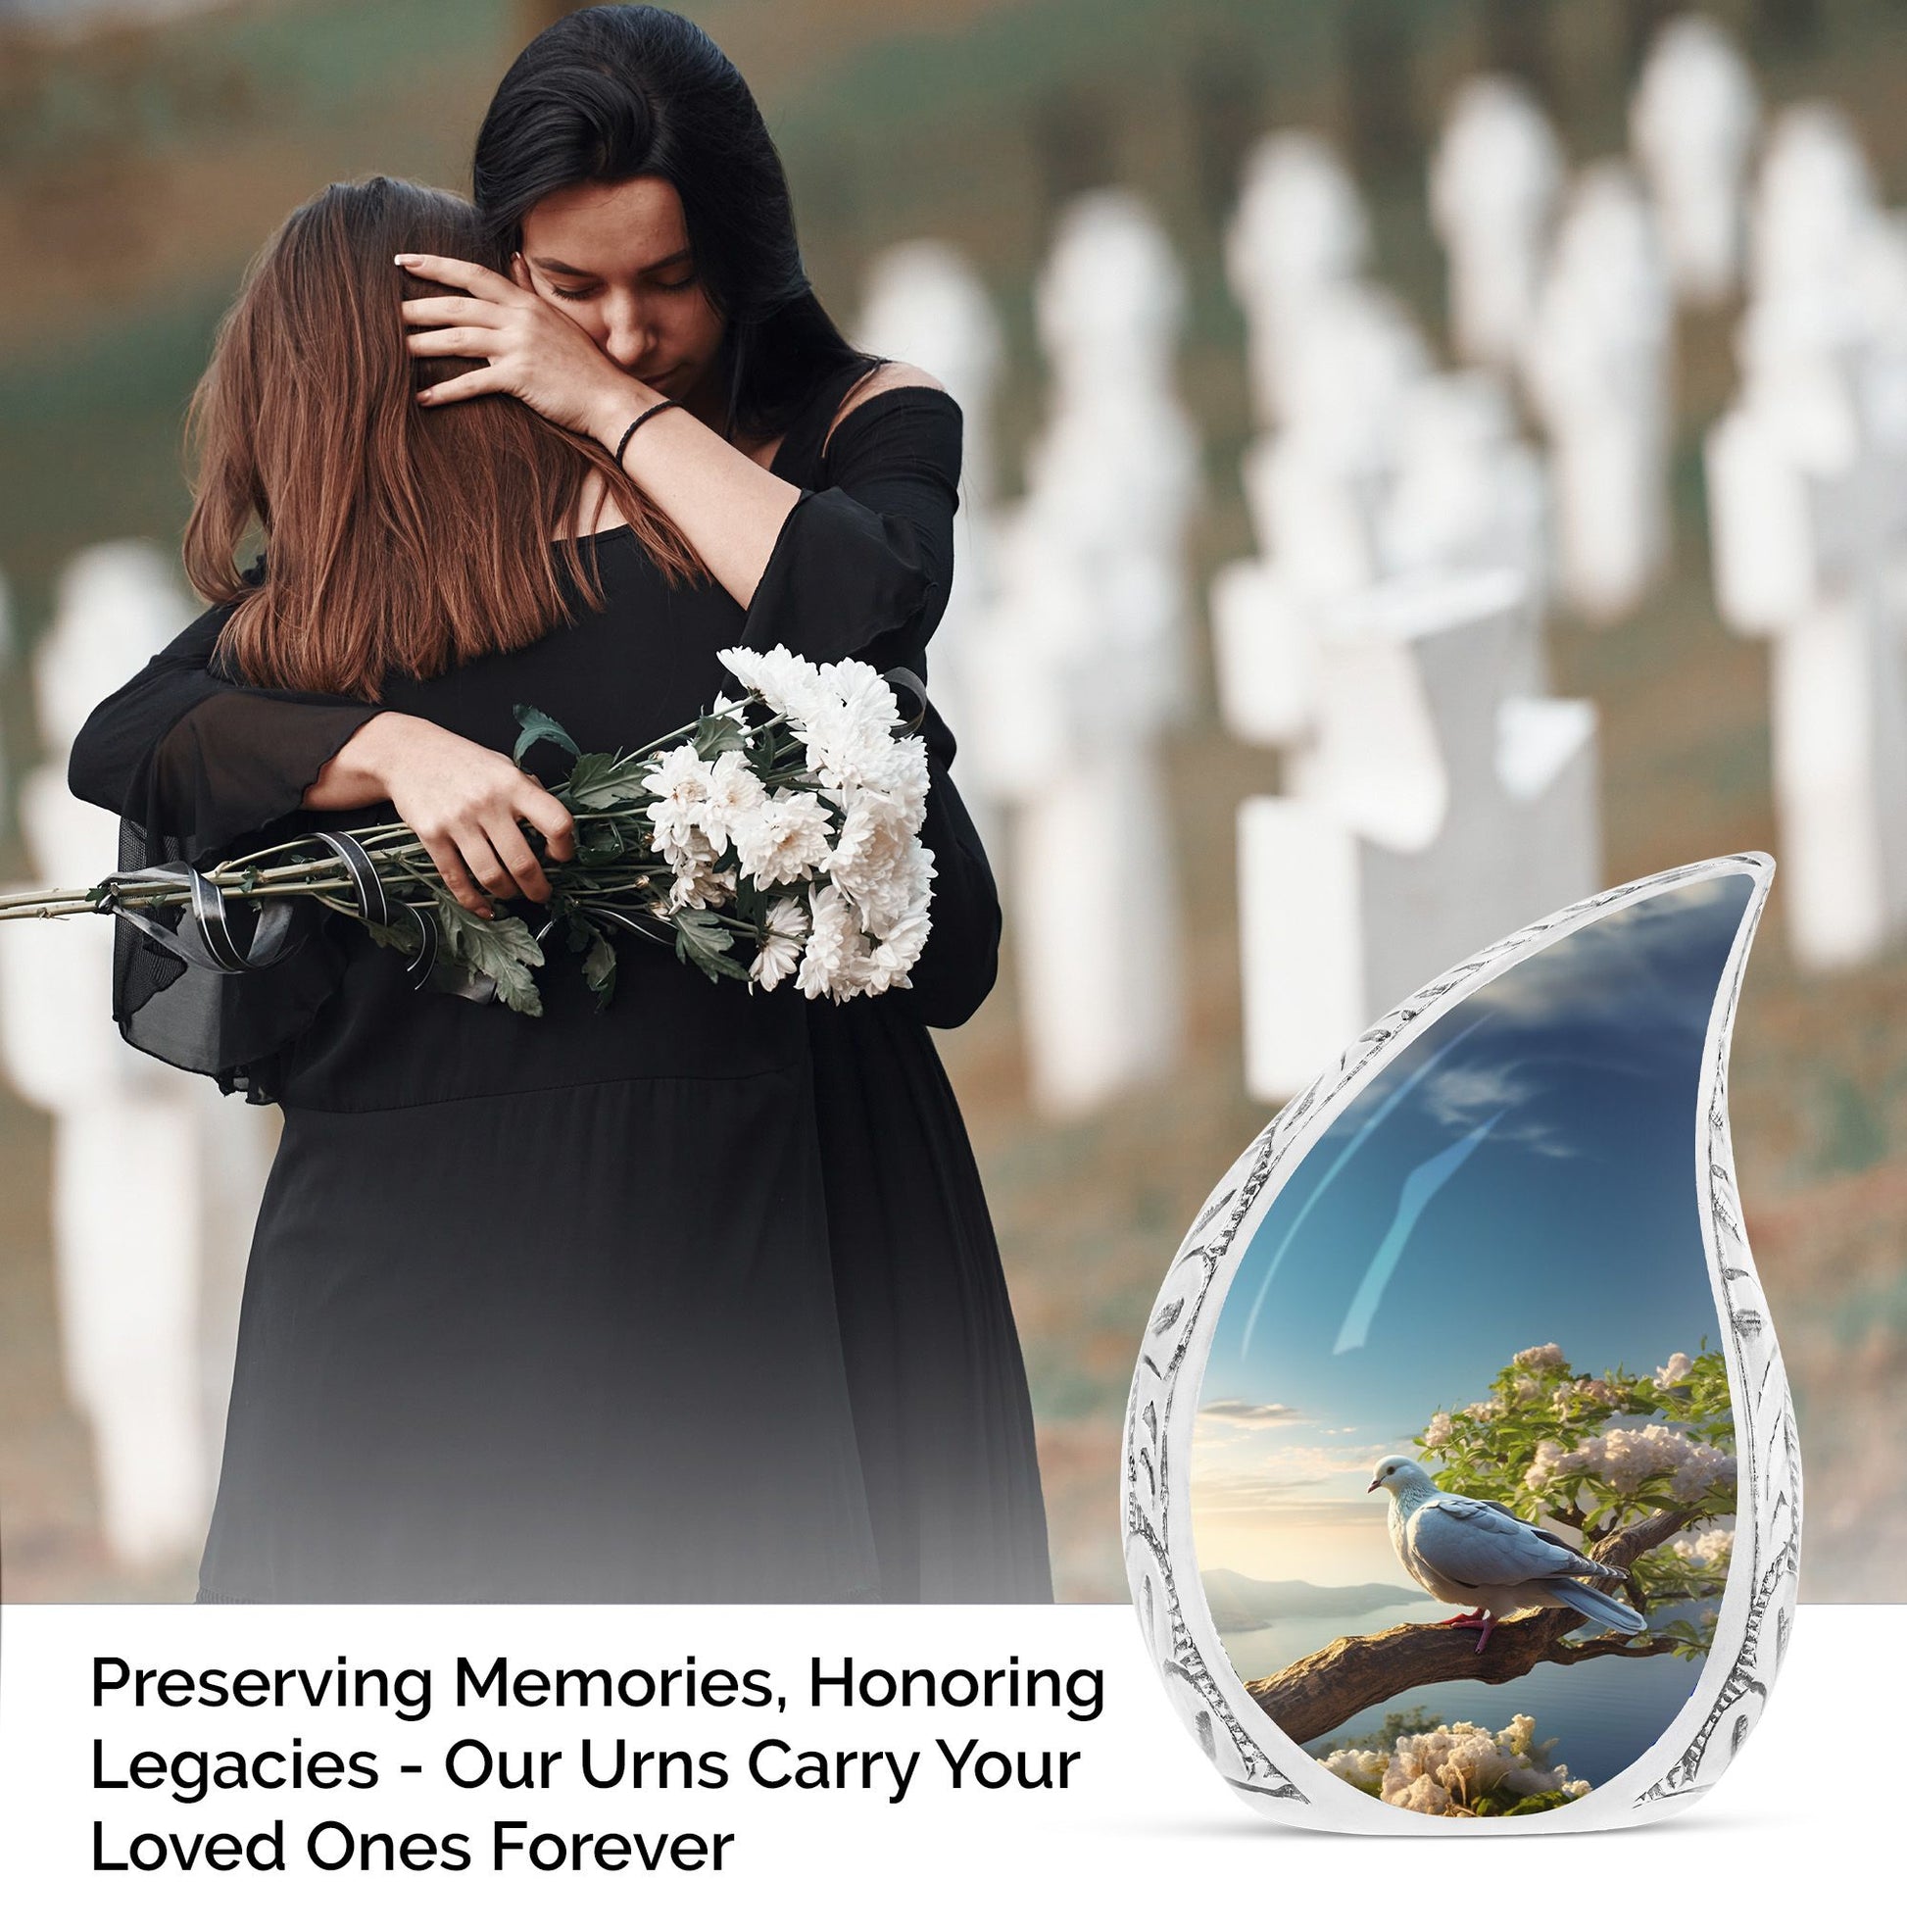 Large cremation urn adorned with dove on tree design, suitable for preserving adult male human ashes